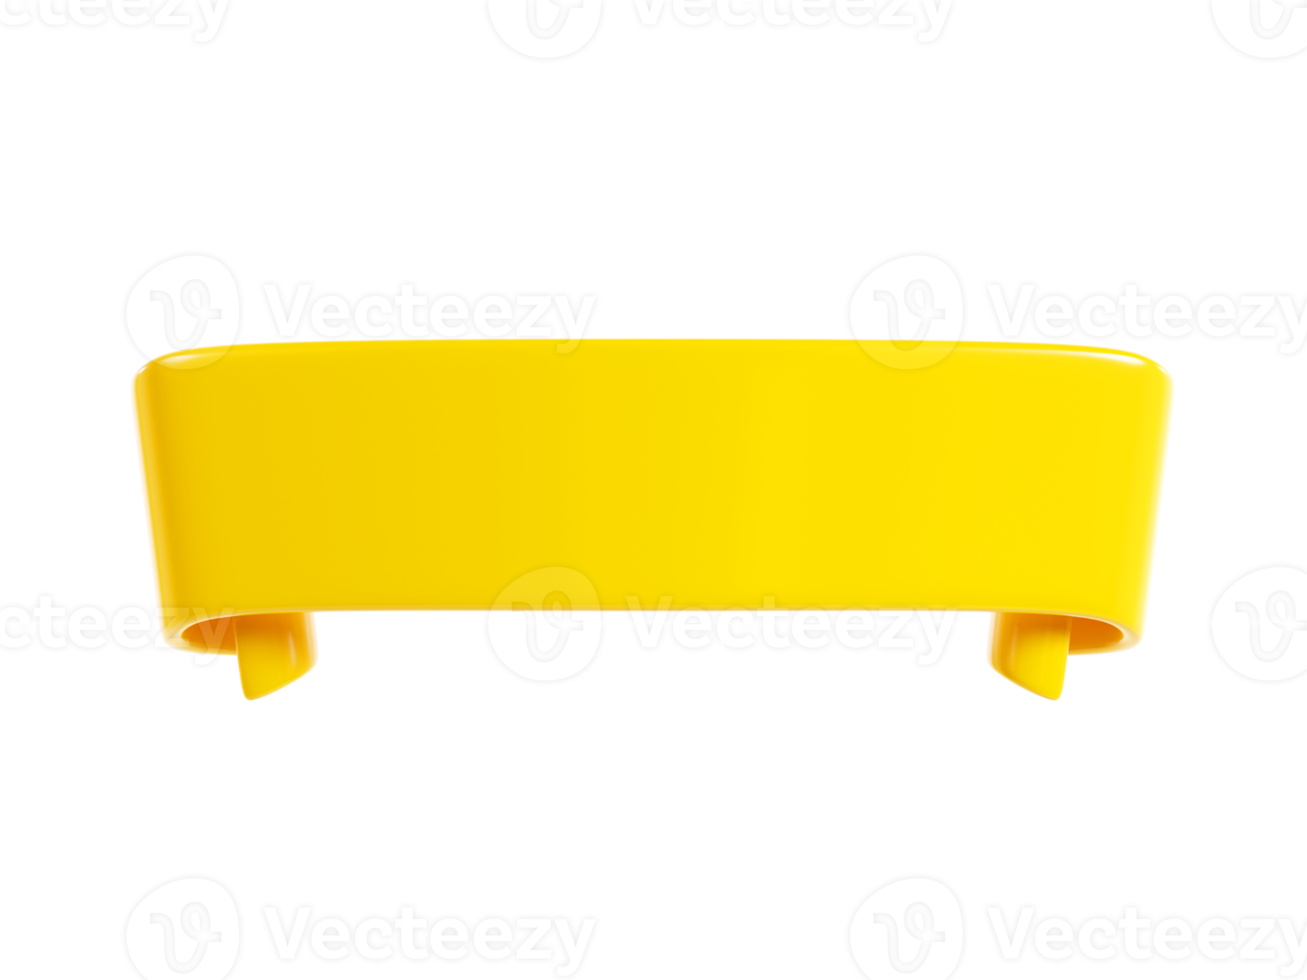 Ribbon text banner 3d render - yellow glossy rolled double tape for sale or promotion message. png